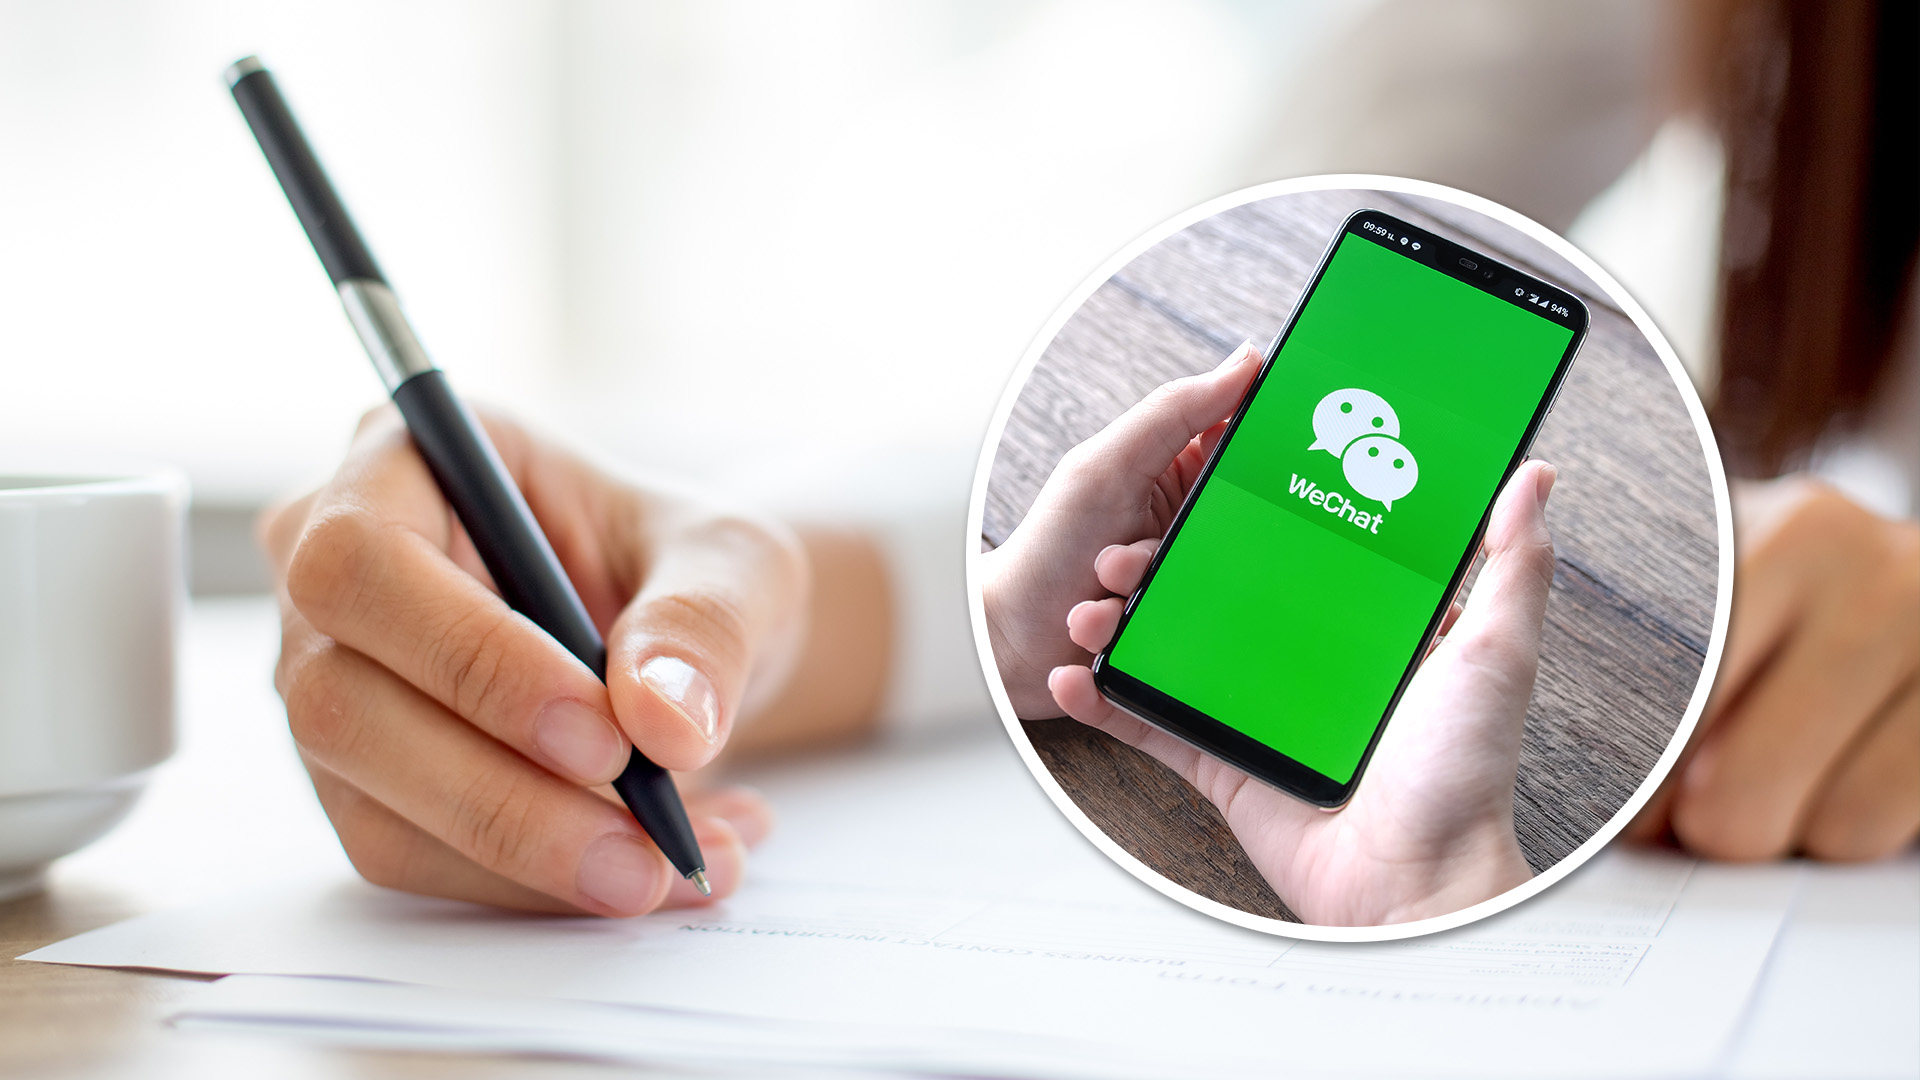 A now deceased woman in China has had her last will and testament, which she posted on the WeChat social media app, declared invalid by a mainland court. Photo: SCMP composite/Shutterstock